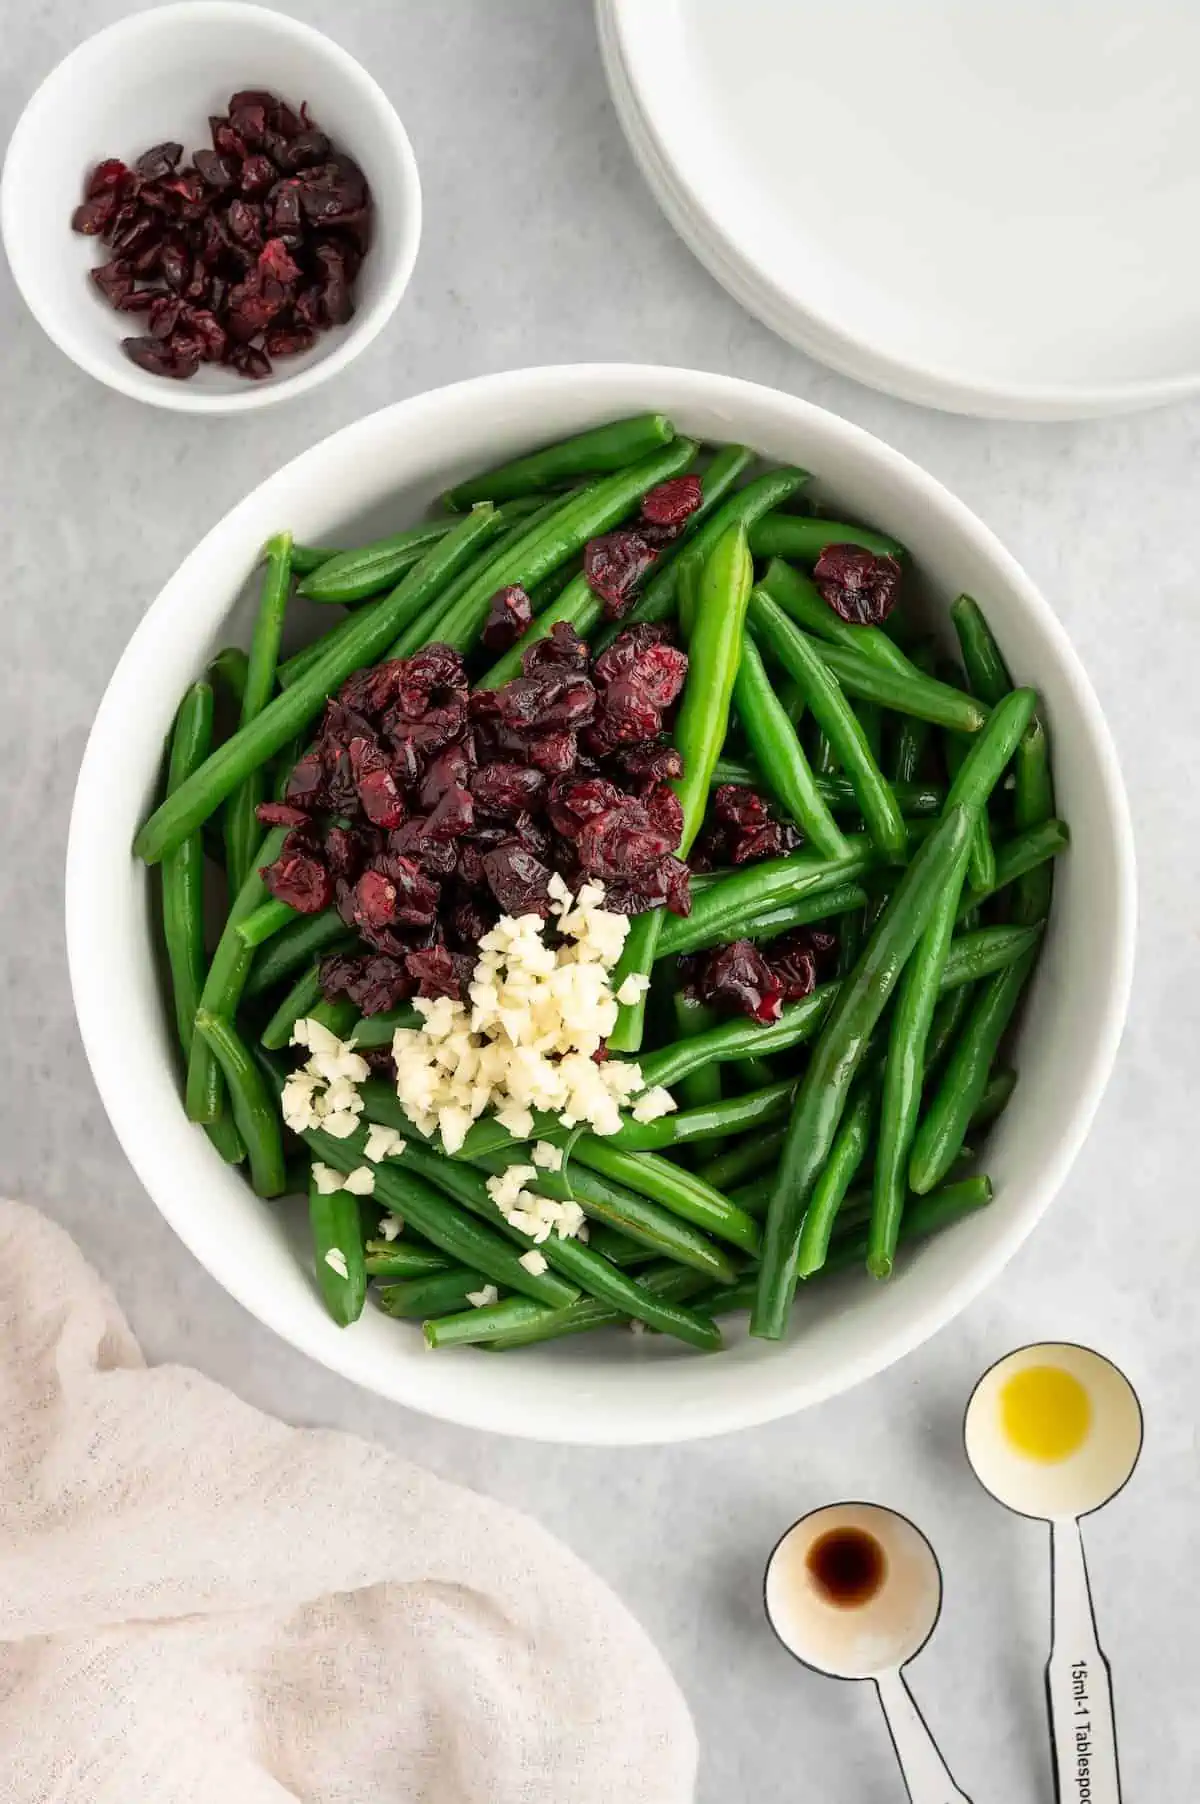 A bowl of green beans with cranberries, minced garlic, and seasonings.